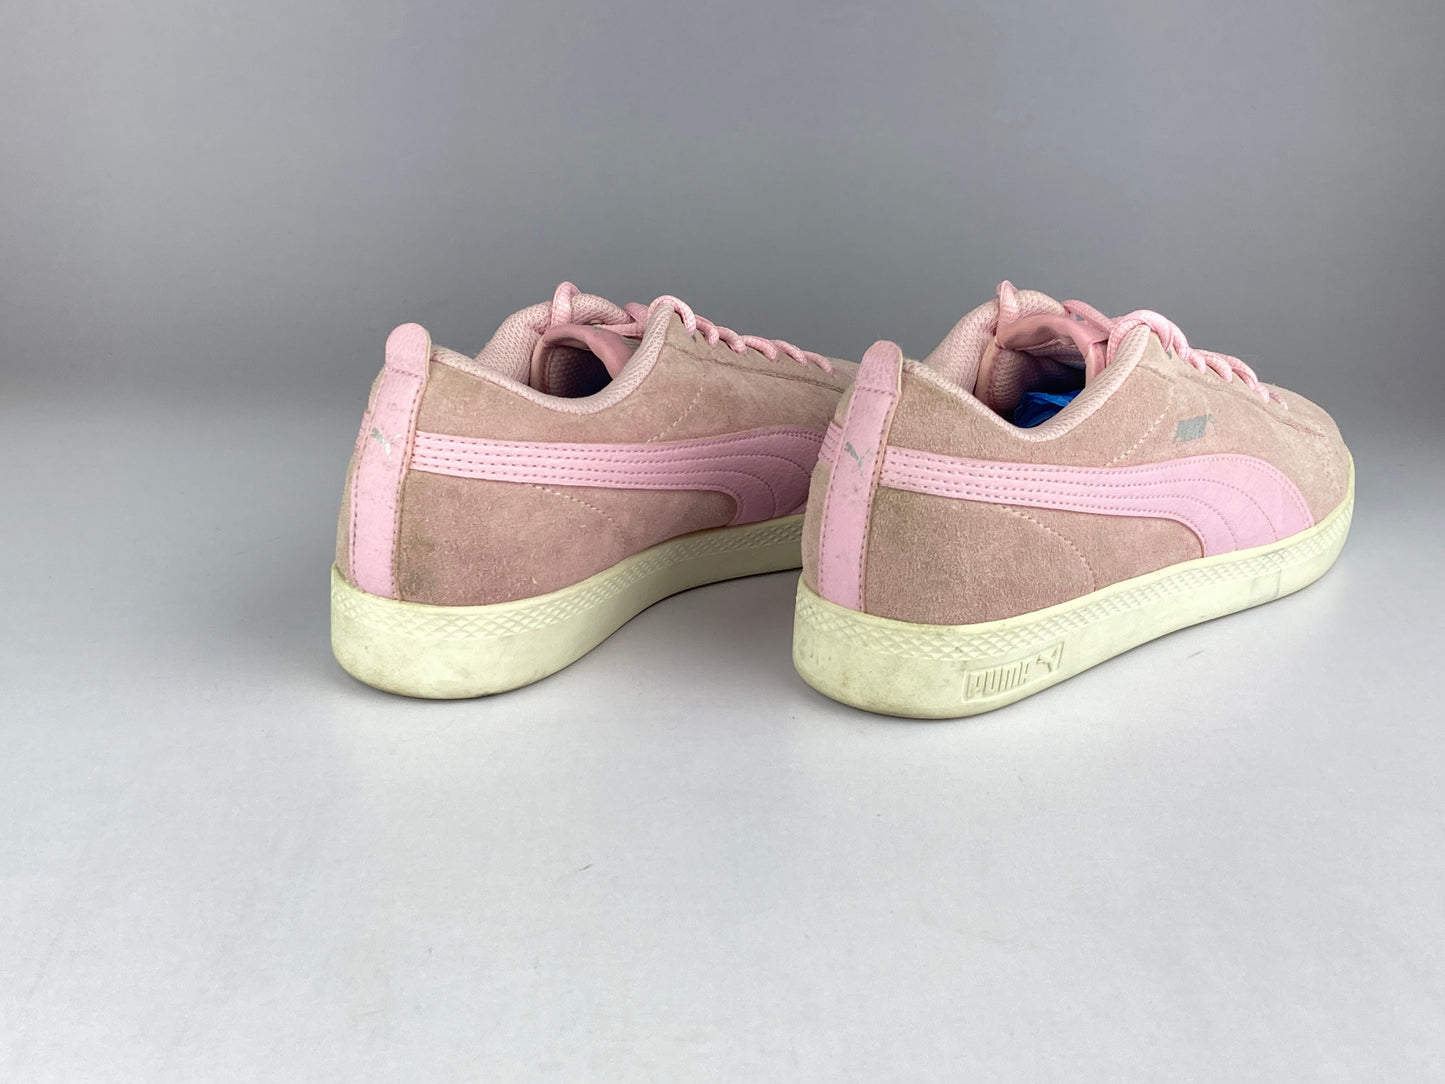 Puma Wmns Smash v2 Suede 'Pink/Silver/White'-Sneakers-Athletic Corner